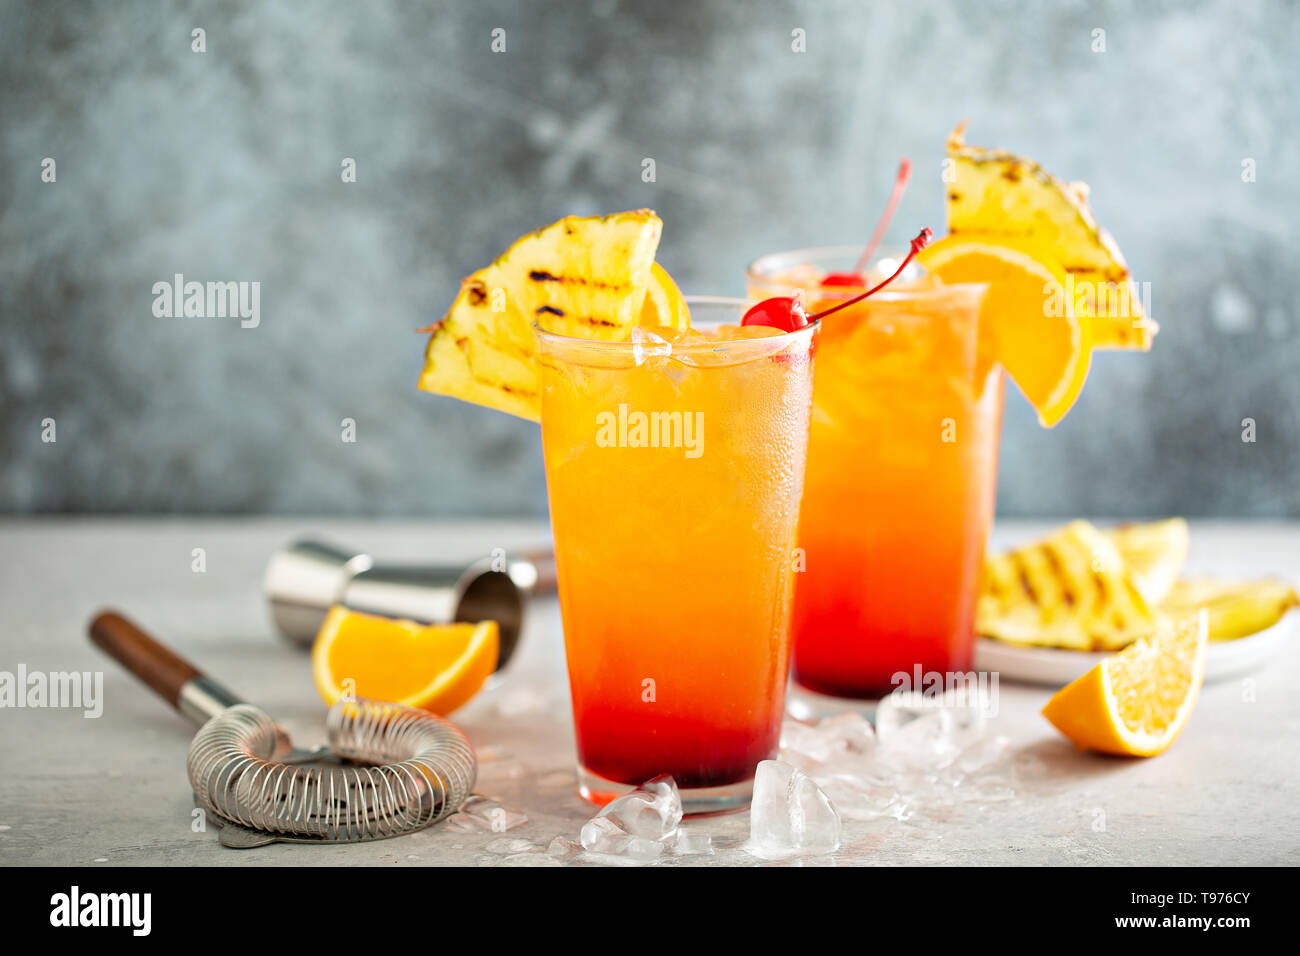 Tequila Sunrise cocktail Foto Stock